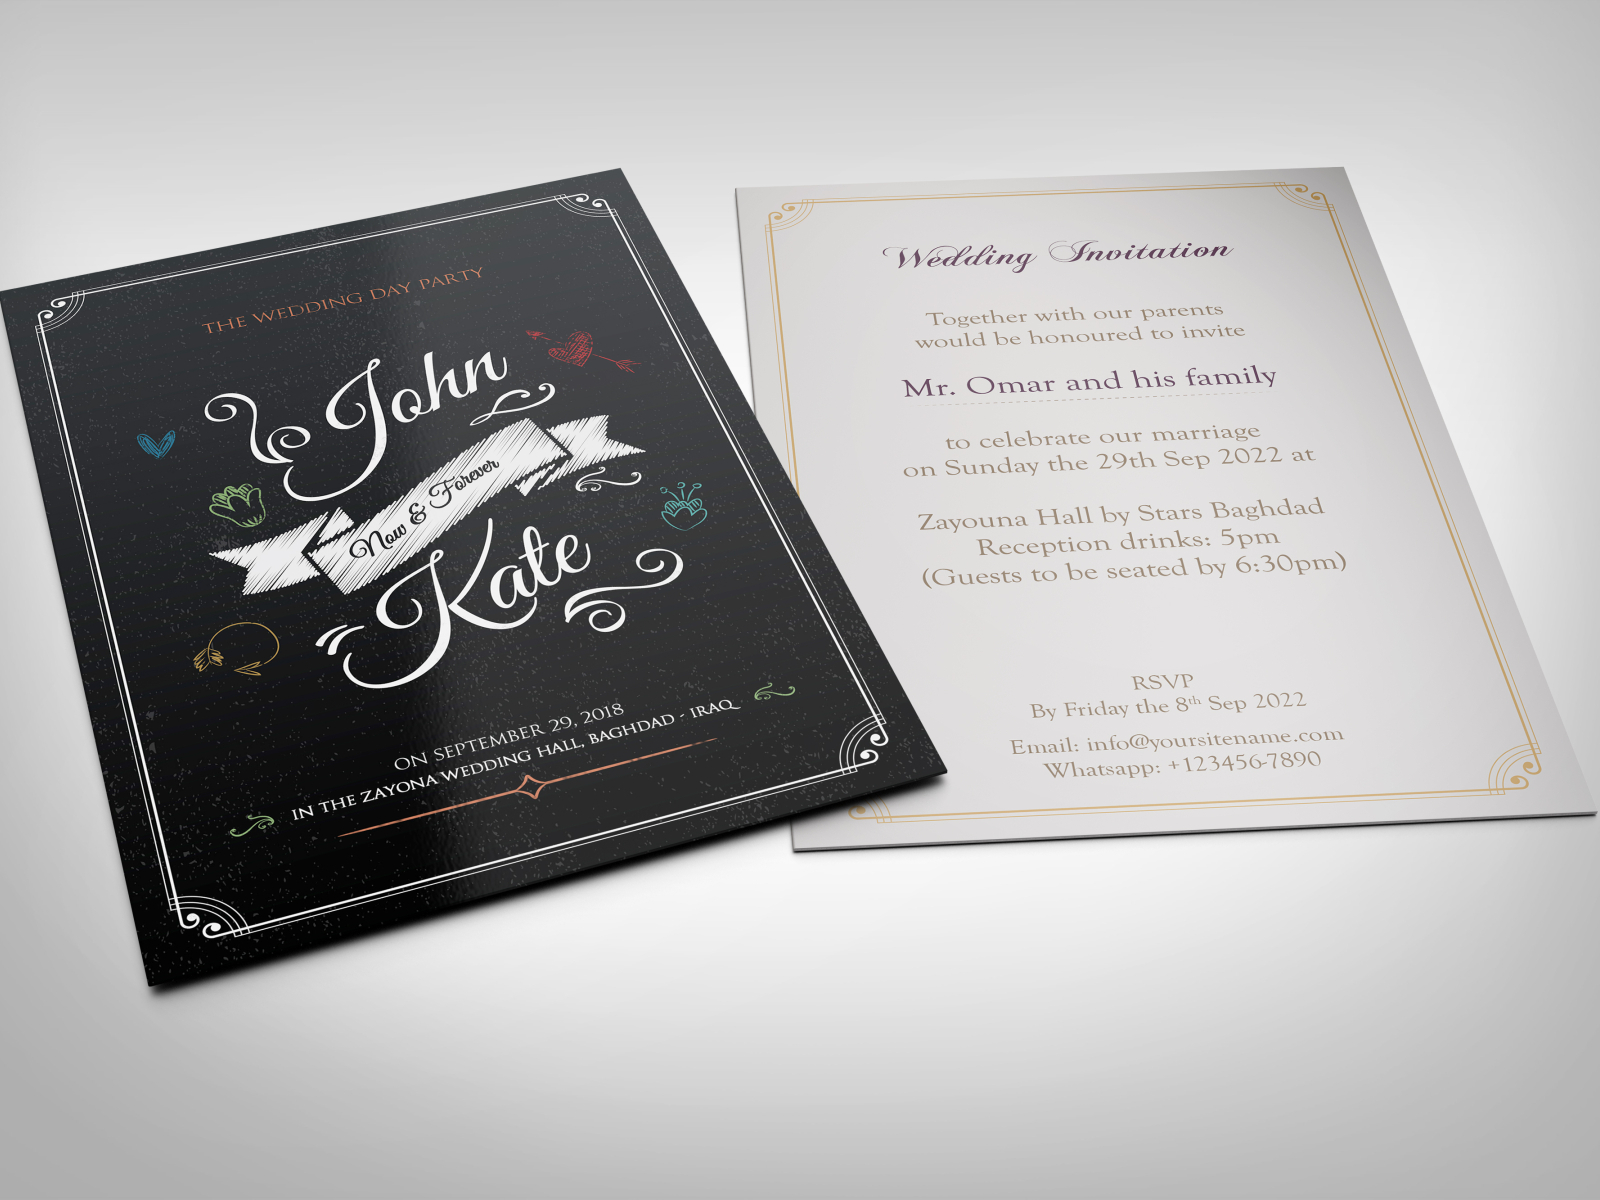 Weeding Invitation Card Template by OWPictures on Dribbble